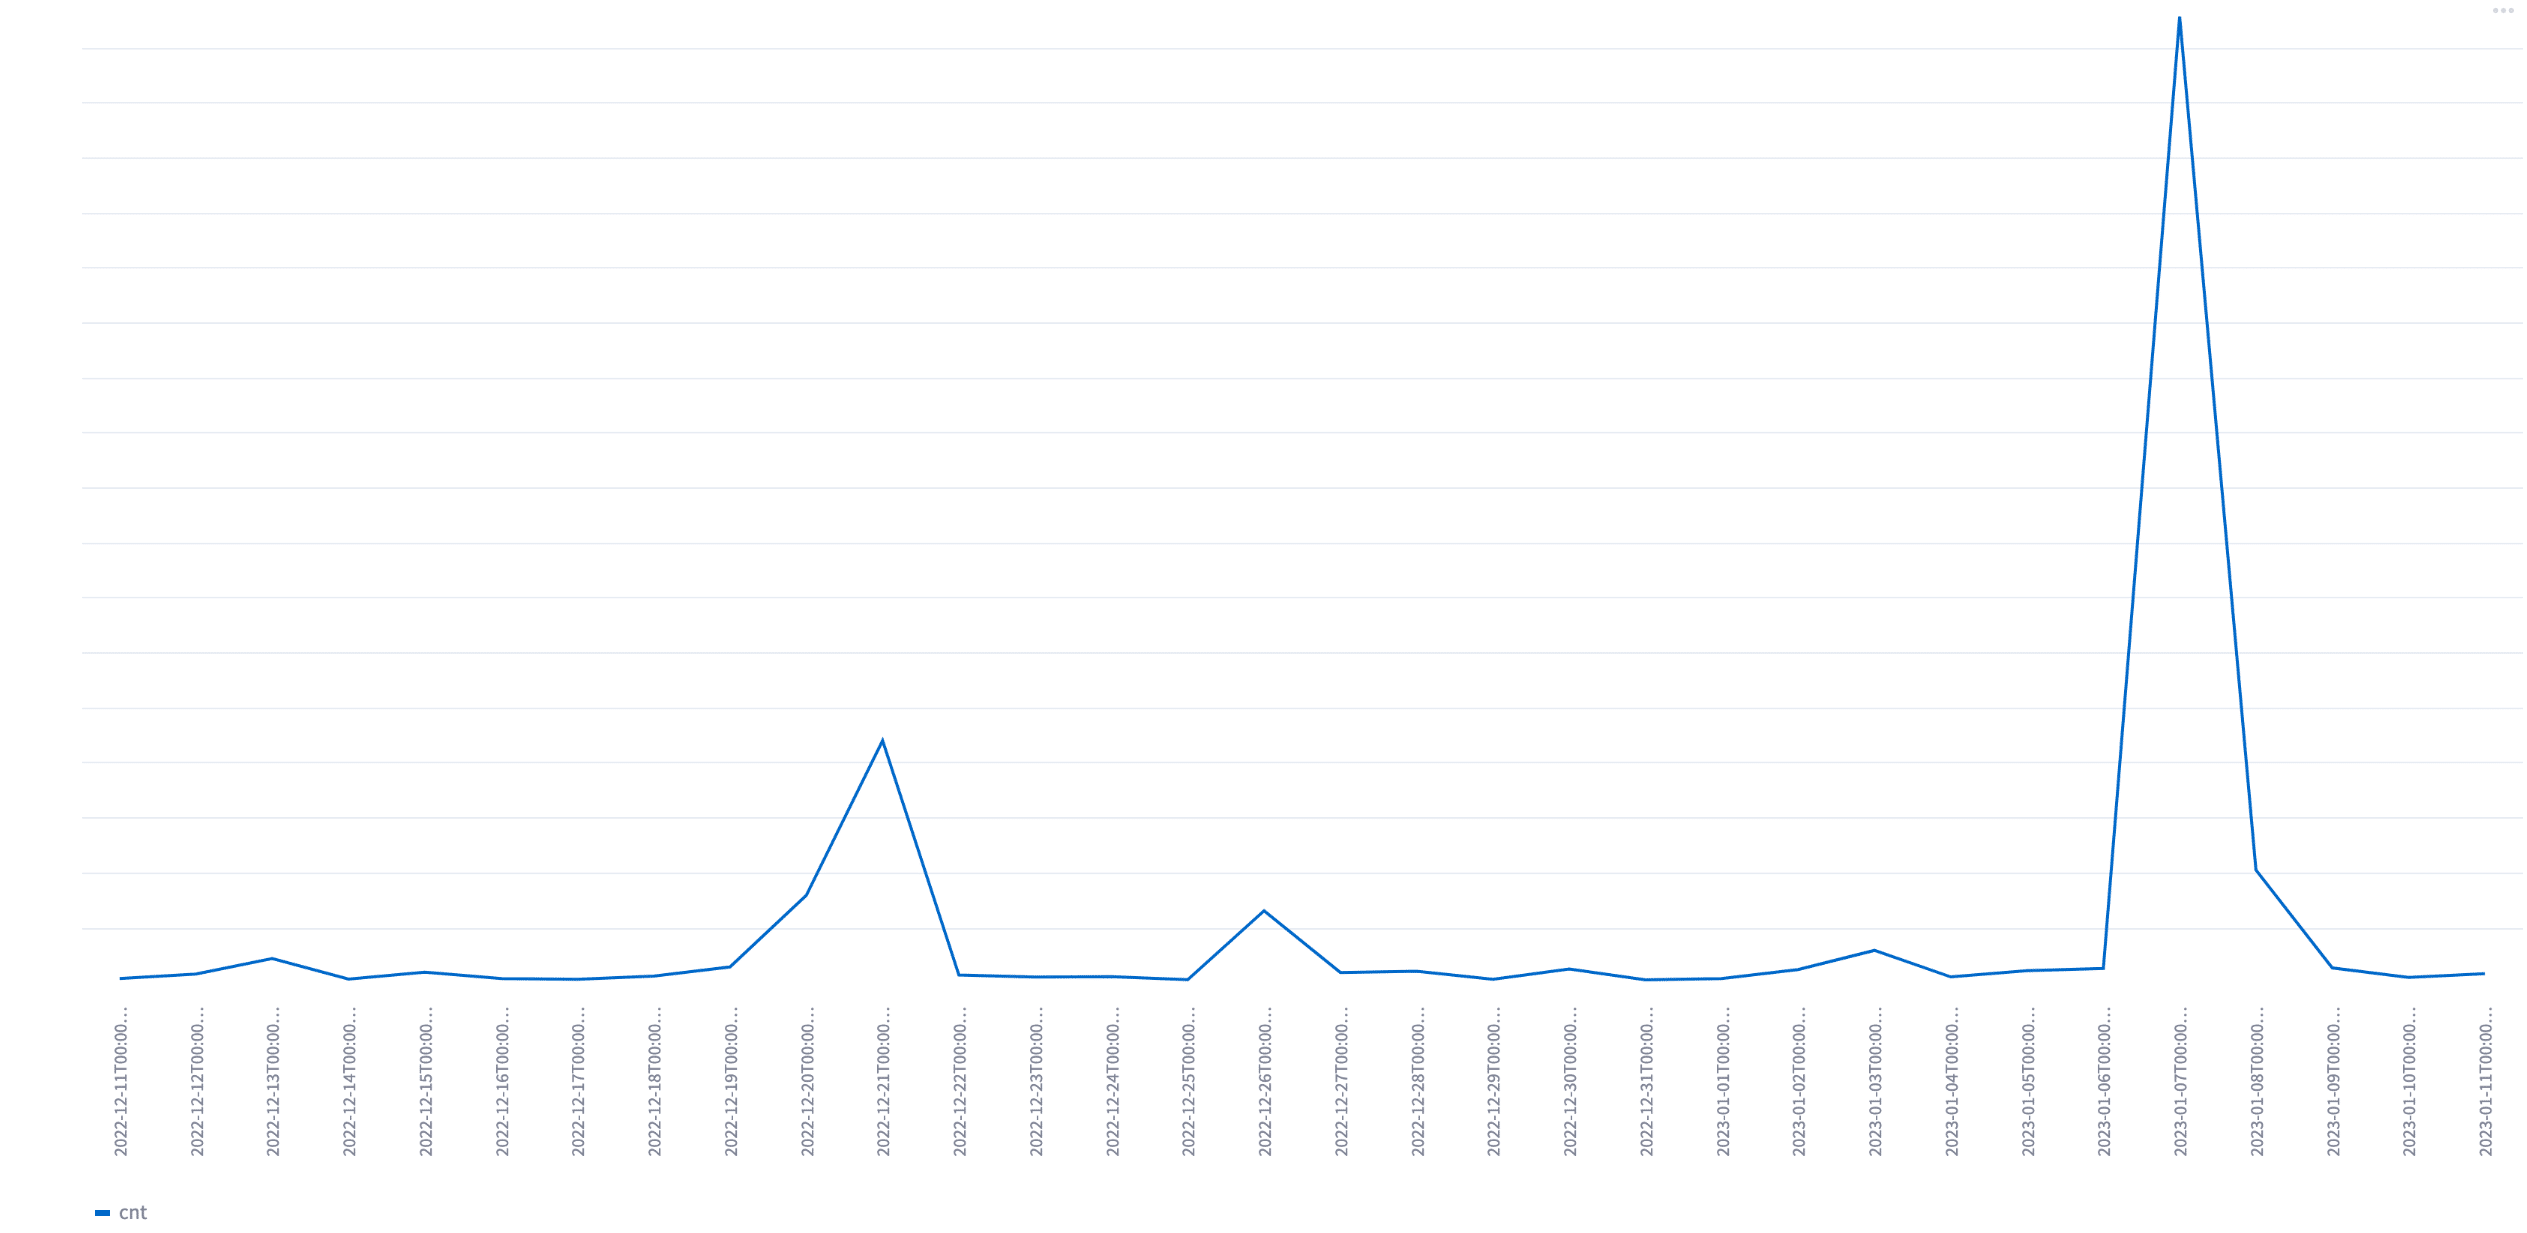 Spike in number of failed logins month view